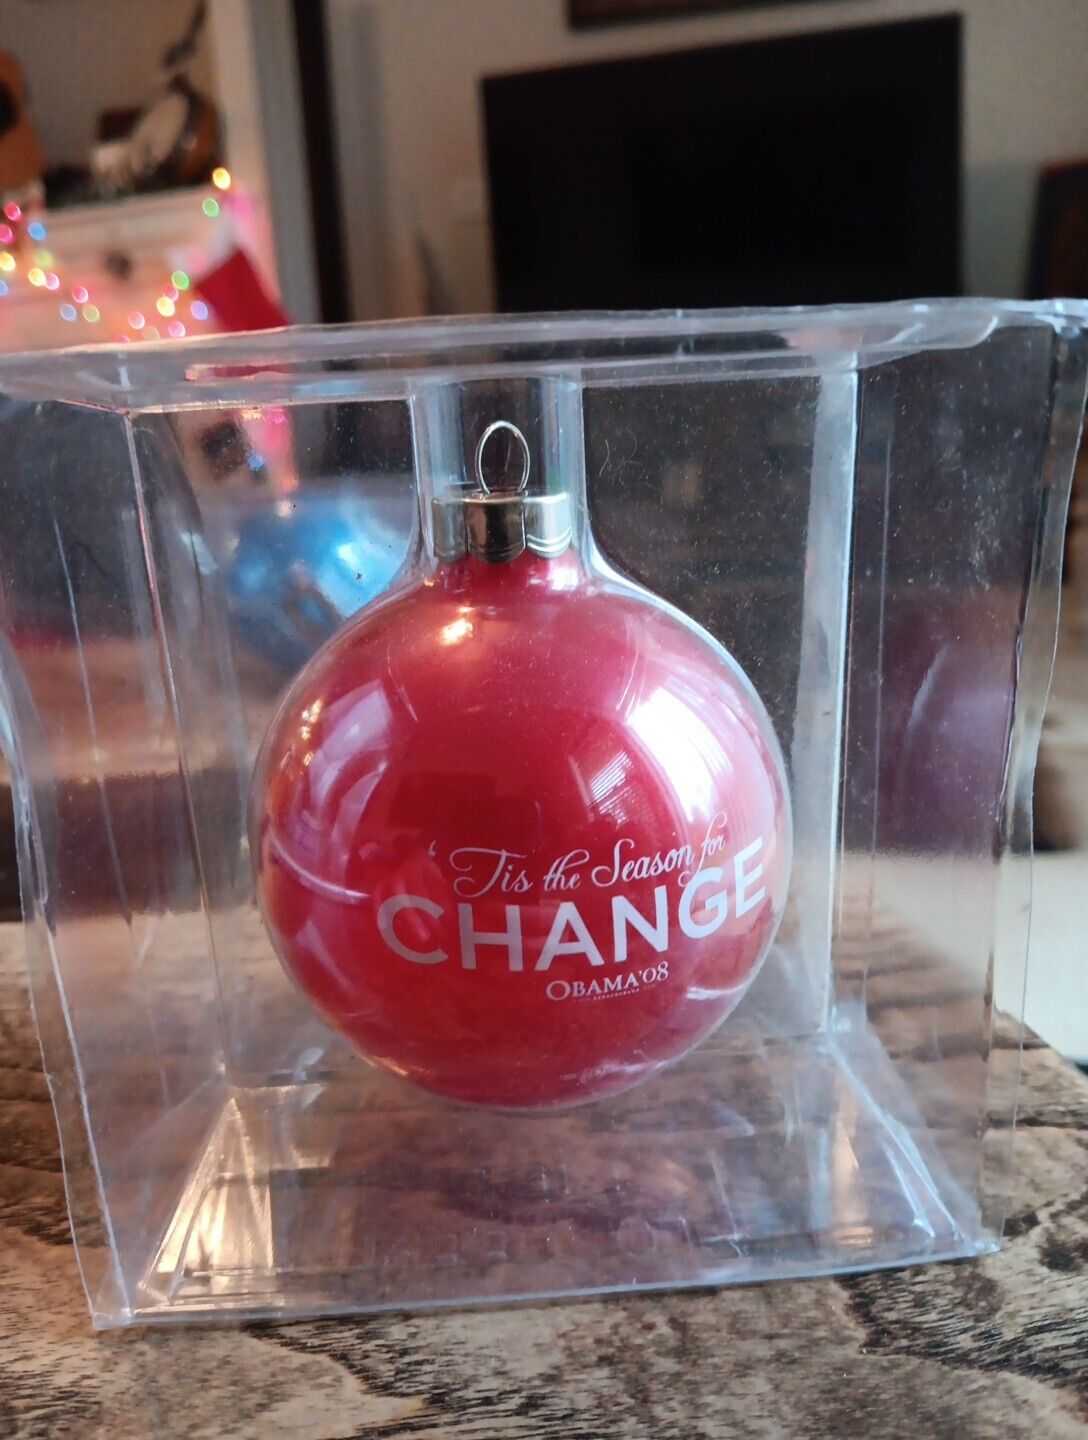 Obama 2008 Collector Christmas Glass Ornament (Red) - VERY RARE COLLECTIBLE 